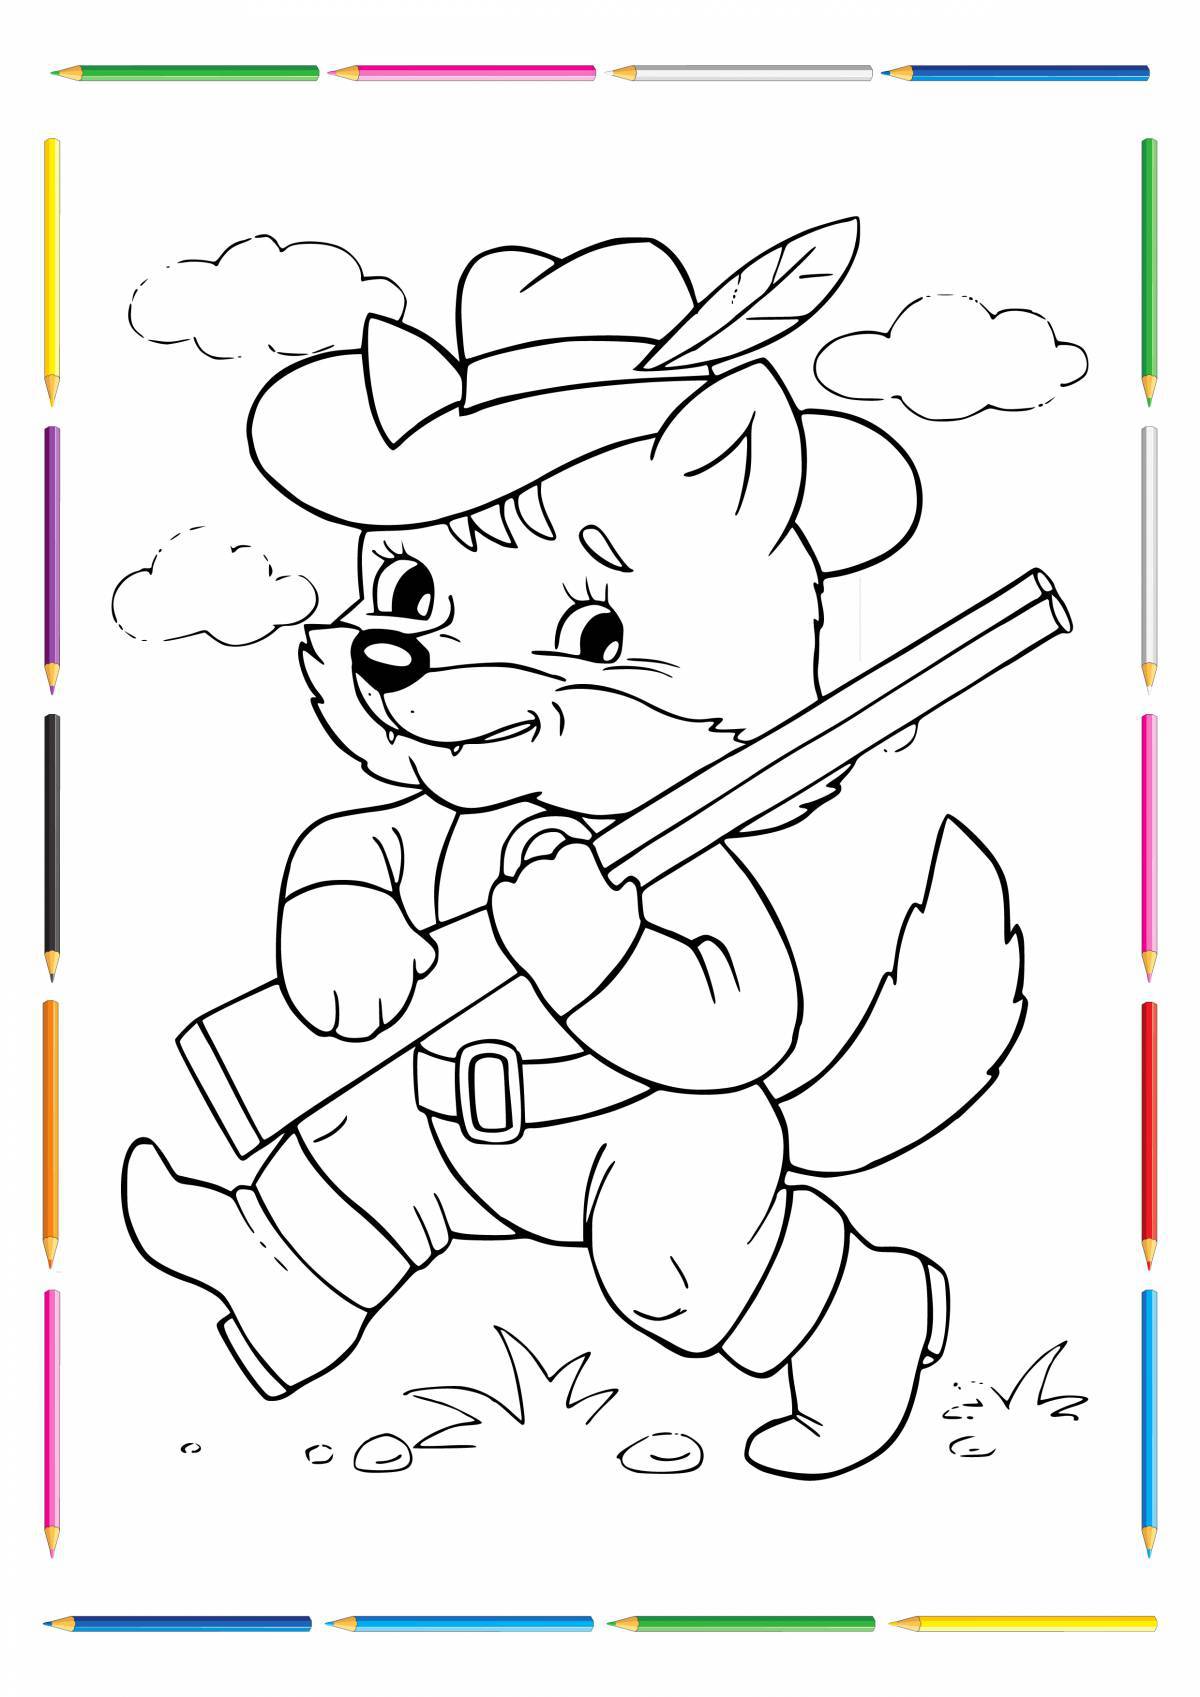 Colourful coloring book for children 6-7 years old